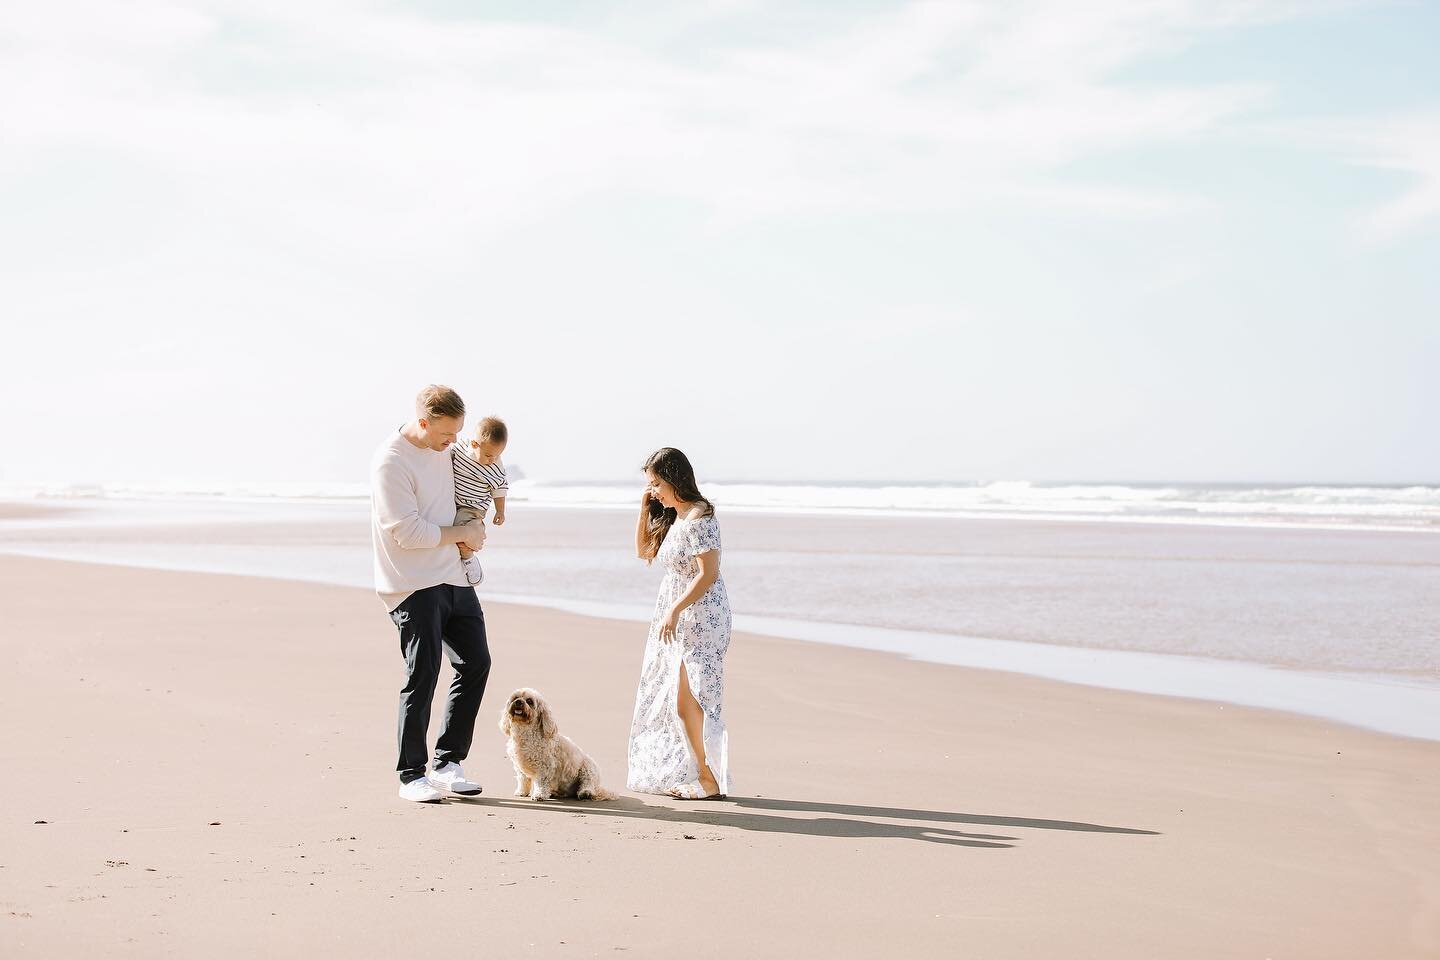 Under the warm embrace of the Oregon sun, this sweet family basks in love and laughter along the stunning coast. With sandy toes, salty air, and the sound of crashing waves as our backdrop, we create cherished memories!